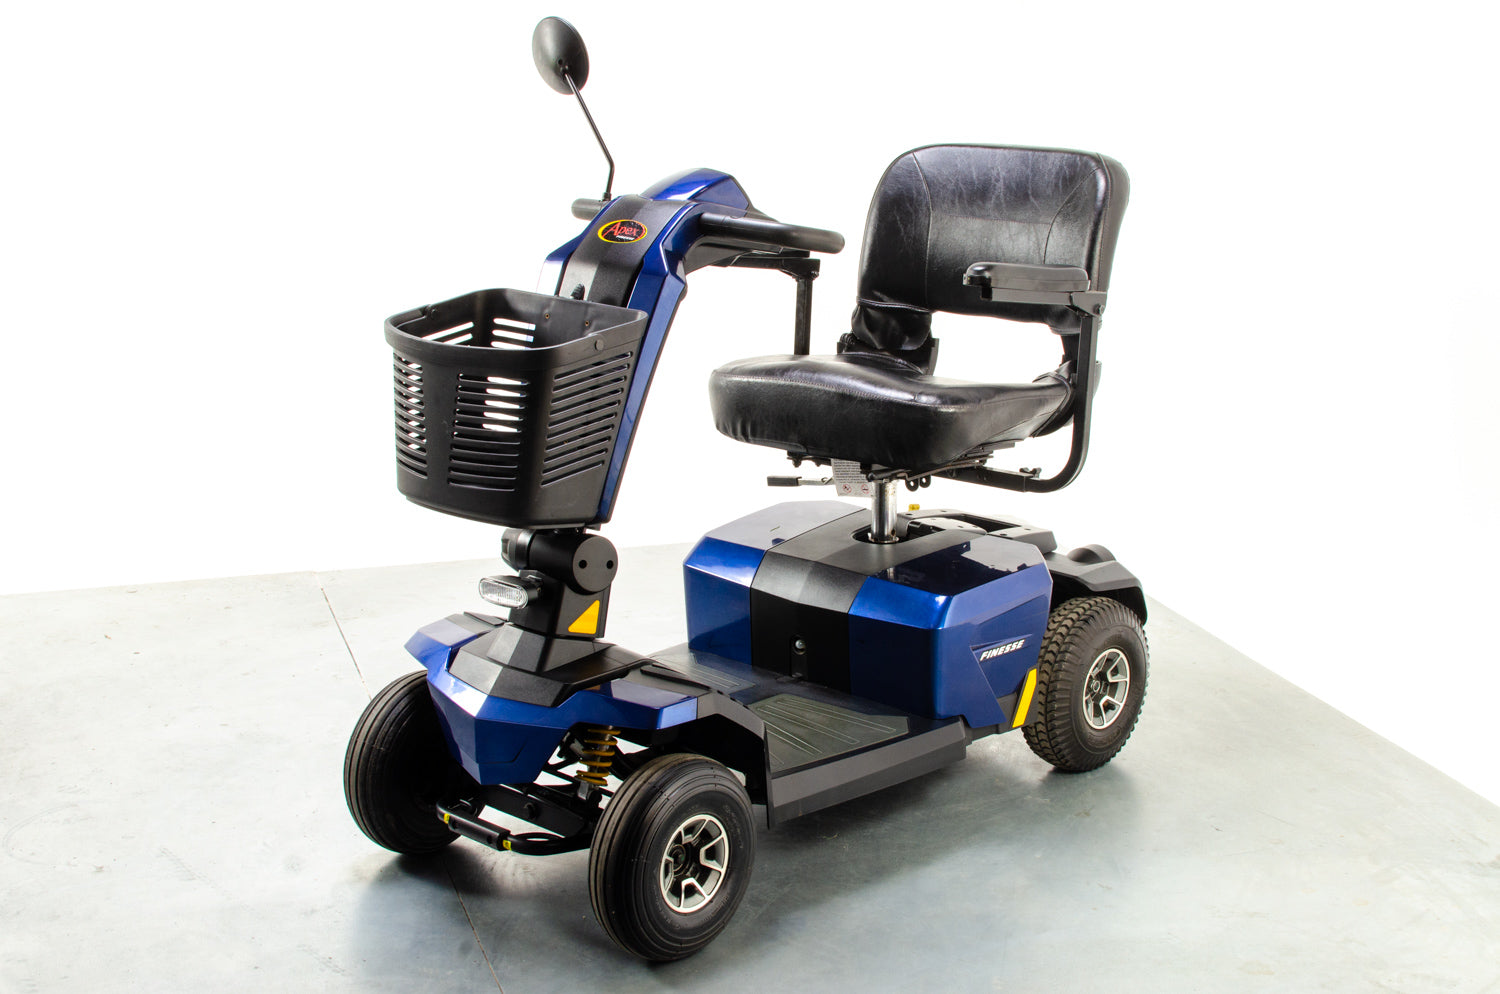 2015 Pride Apex Finesse Electric Mobility Scooter Used Second Hand 4mph Mid Size Transportable in Blue